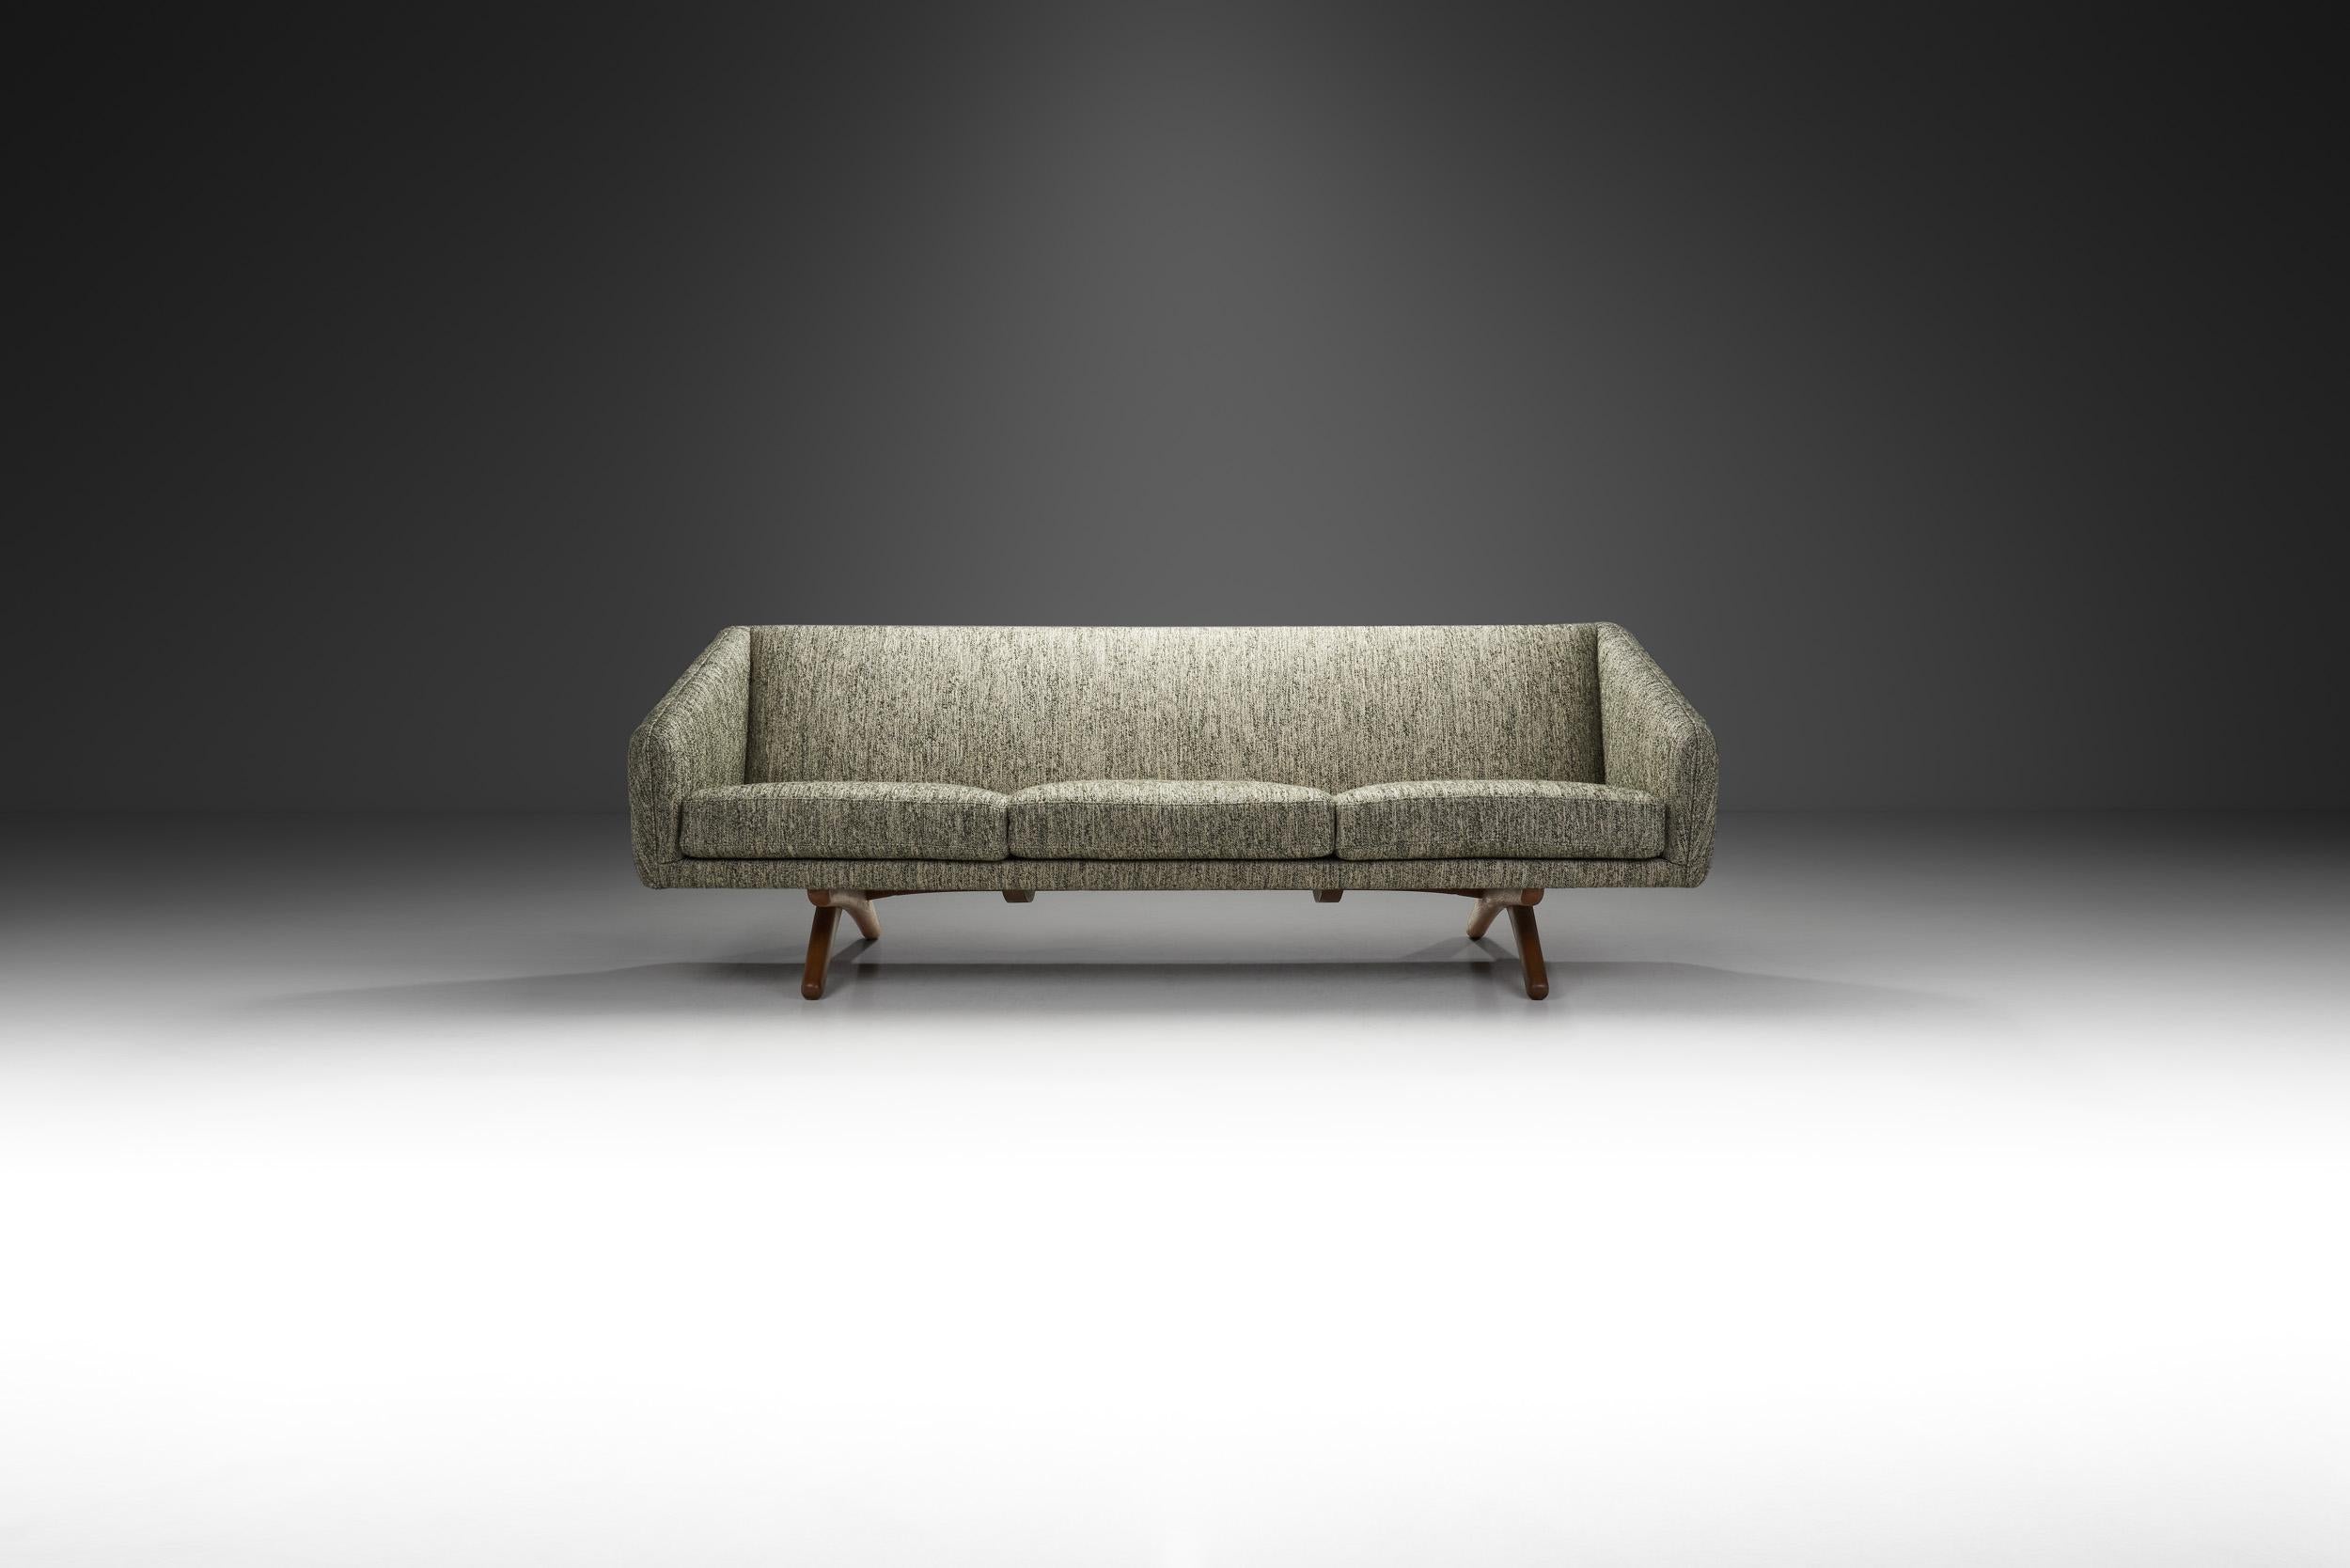 European Mid-Century Modern Three-Seater Sofa with Wooden Cross Legs, Europe, ca 1950s For Sale